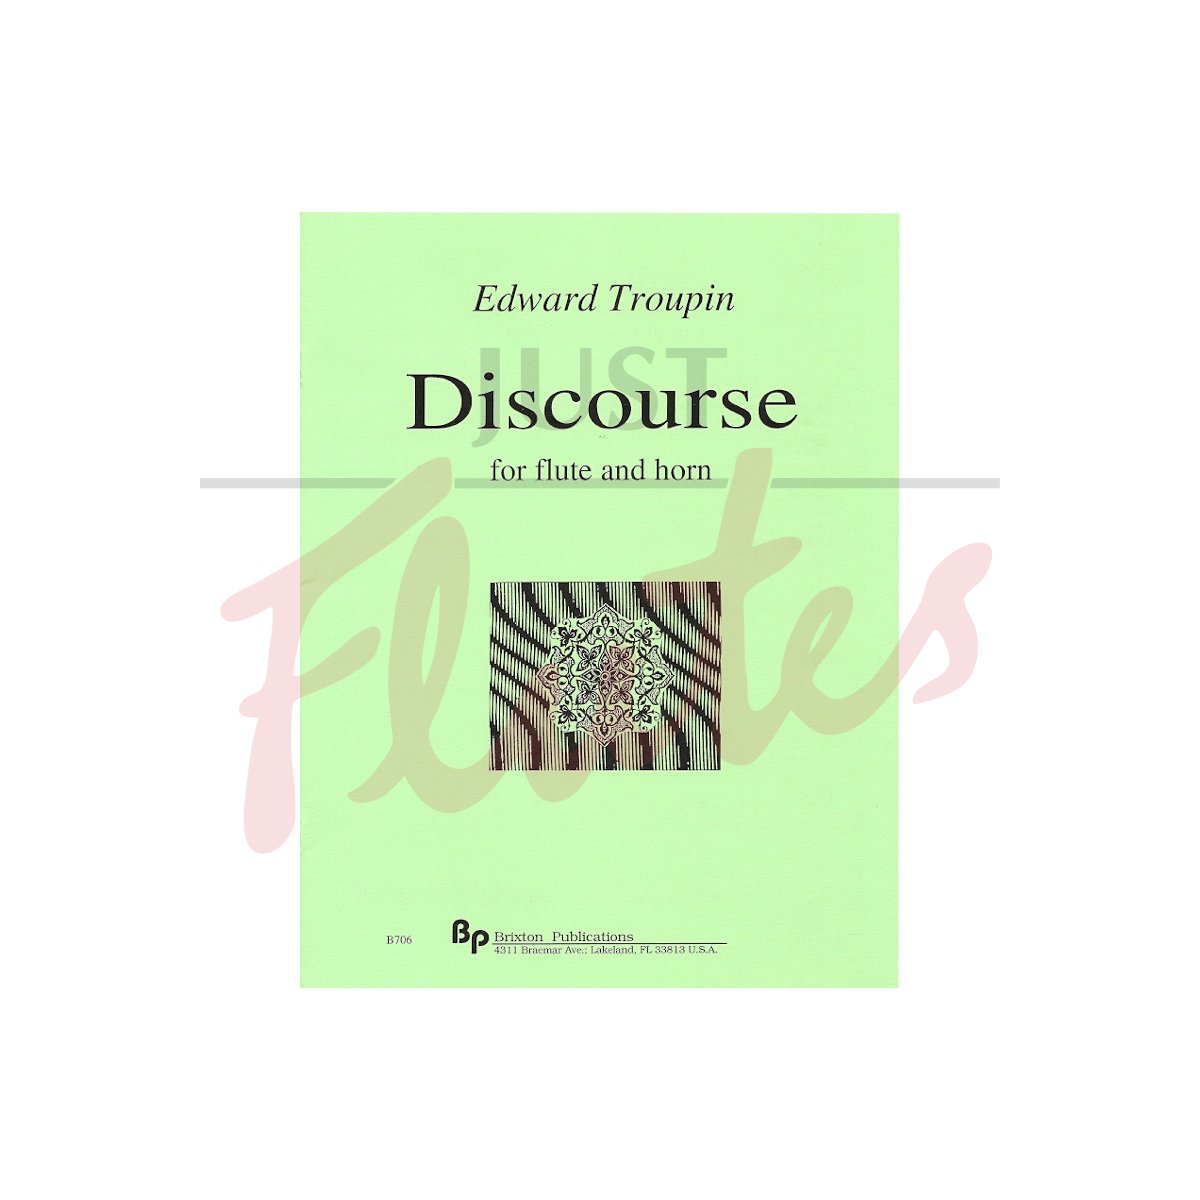 Discourse [Flute and Horn]